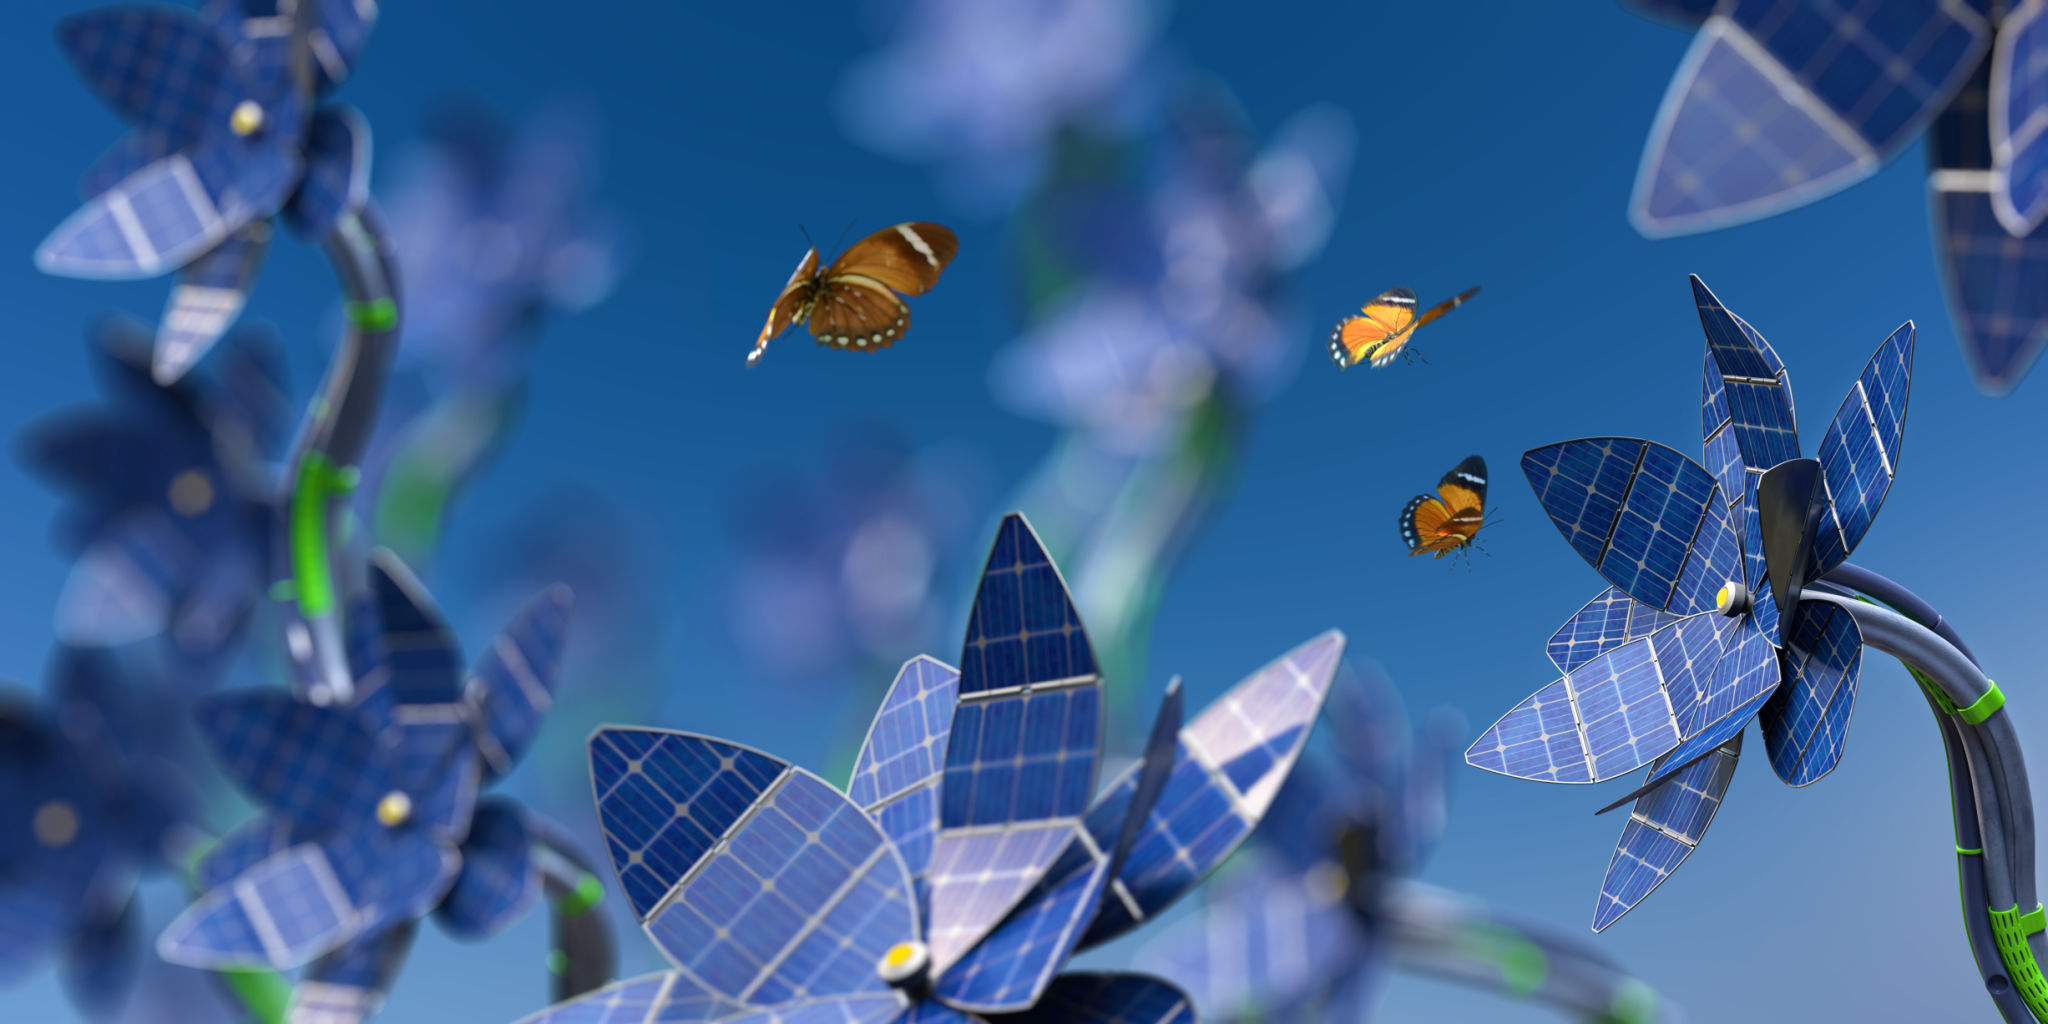 A macro image with shallow depth of field of a group of futuristic flowers with petals made from solar panels and stem made from cables. Three Orange Forester butterflies are in mid flight amongst the flowers. Butterflies have blurred motion. Focus is on the flower on the right hand side.